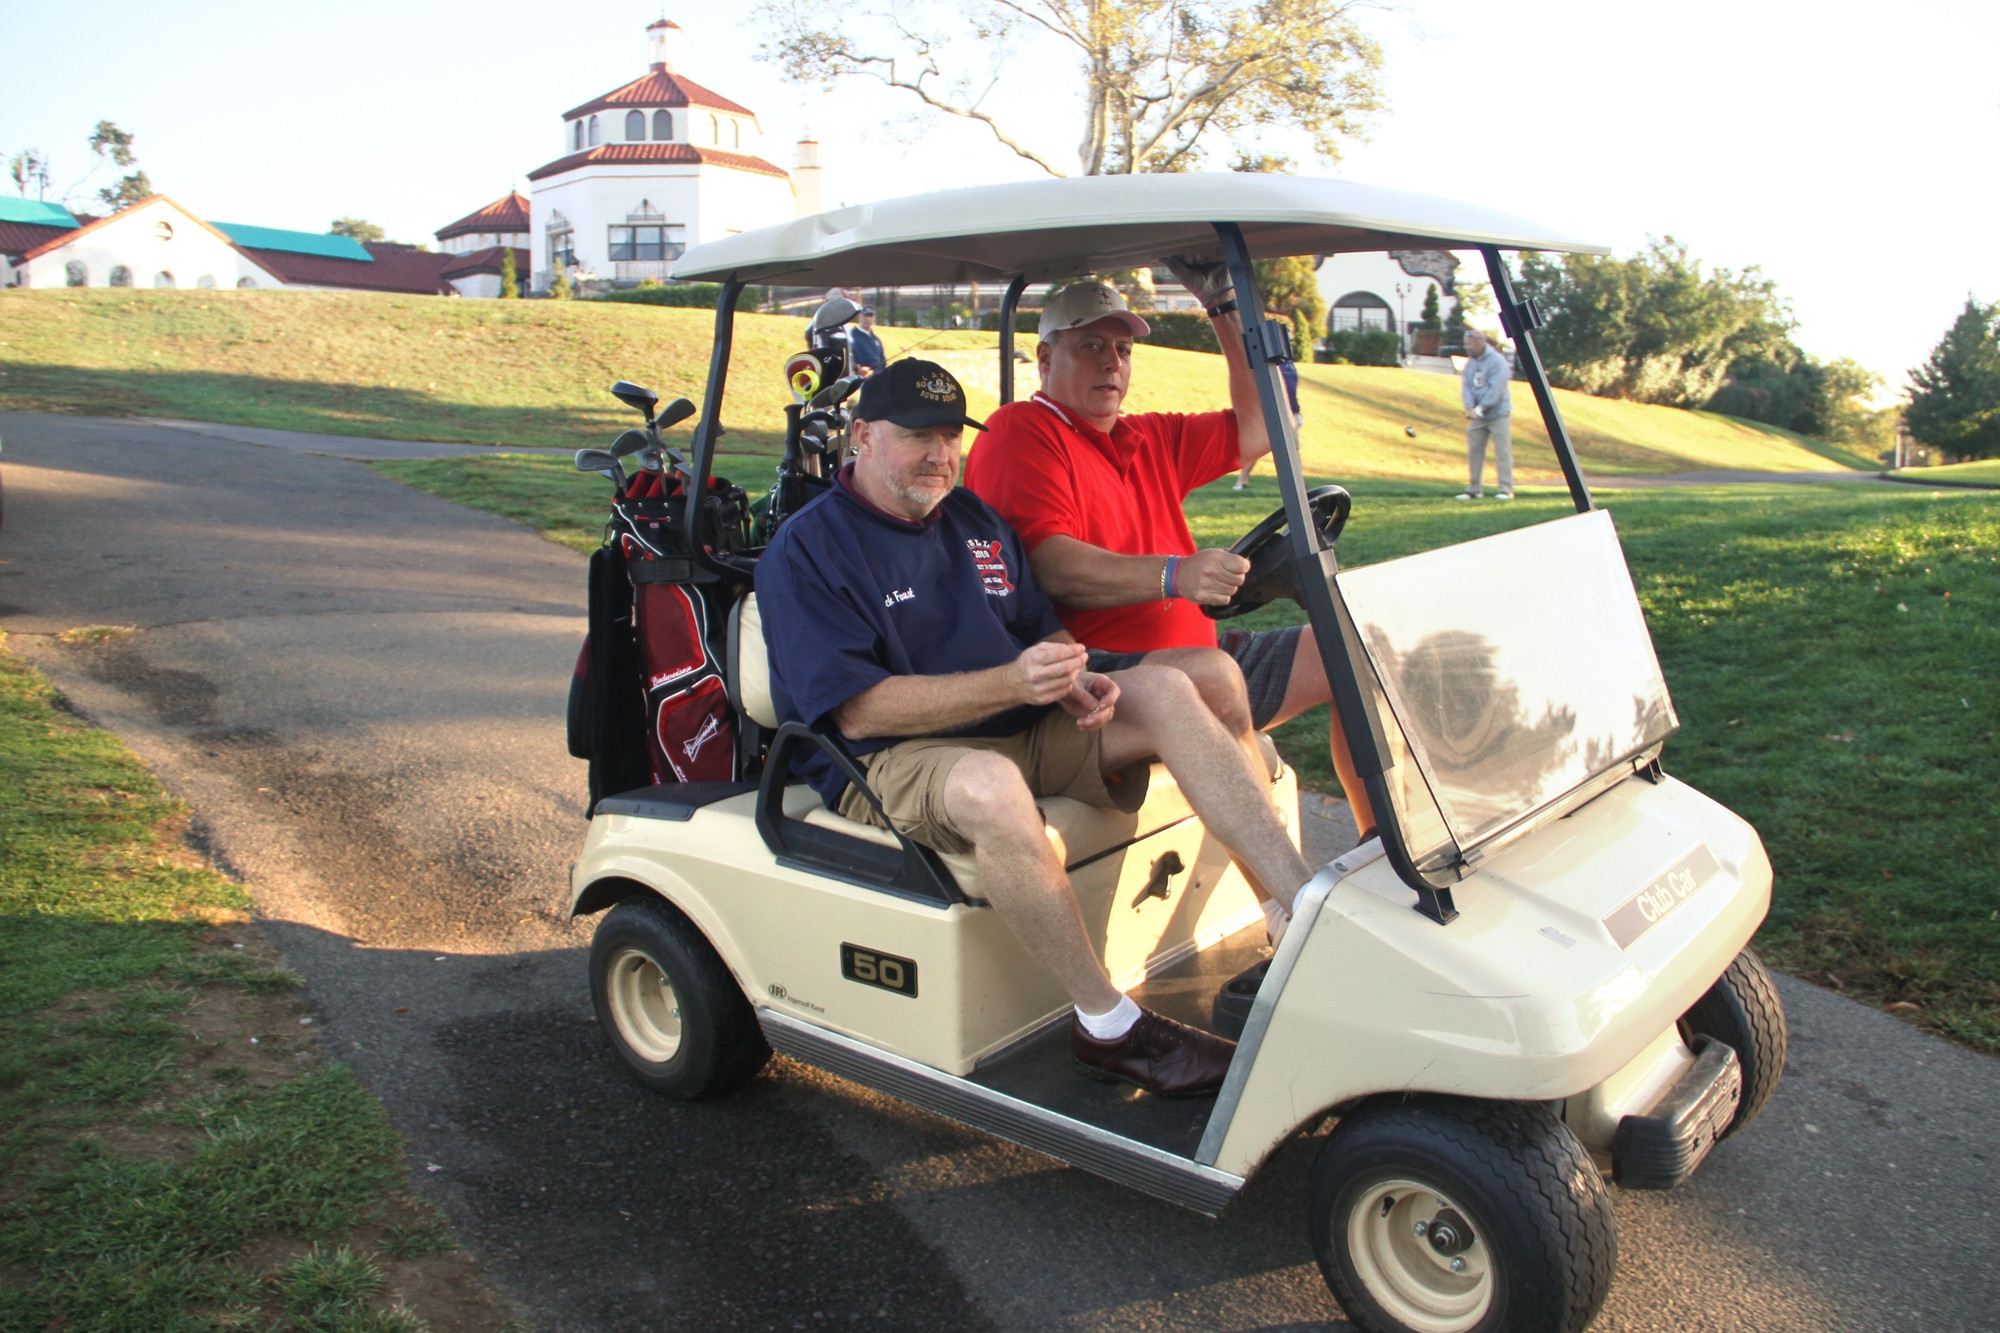 John Faust and Bill Butler headed out for a morning of golf in Douglaston on Monday for the annual Johnny LaBarbera Golf Outing.